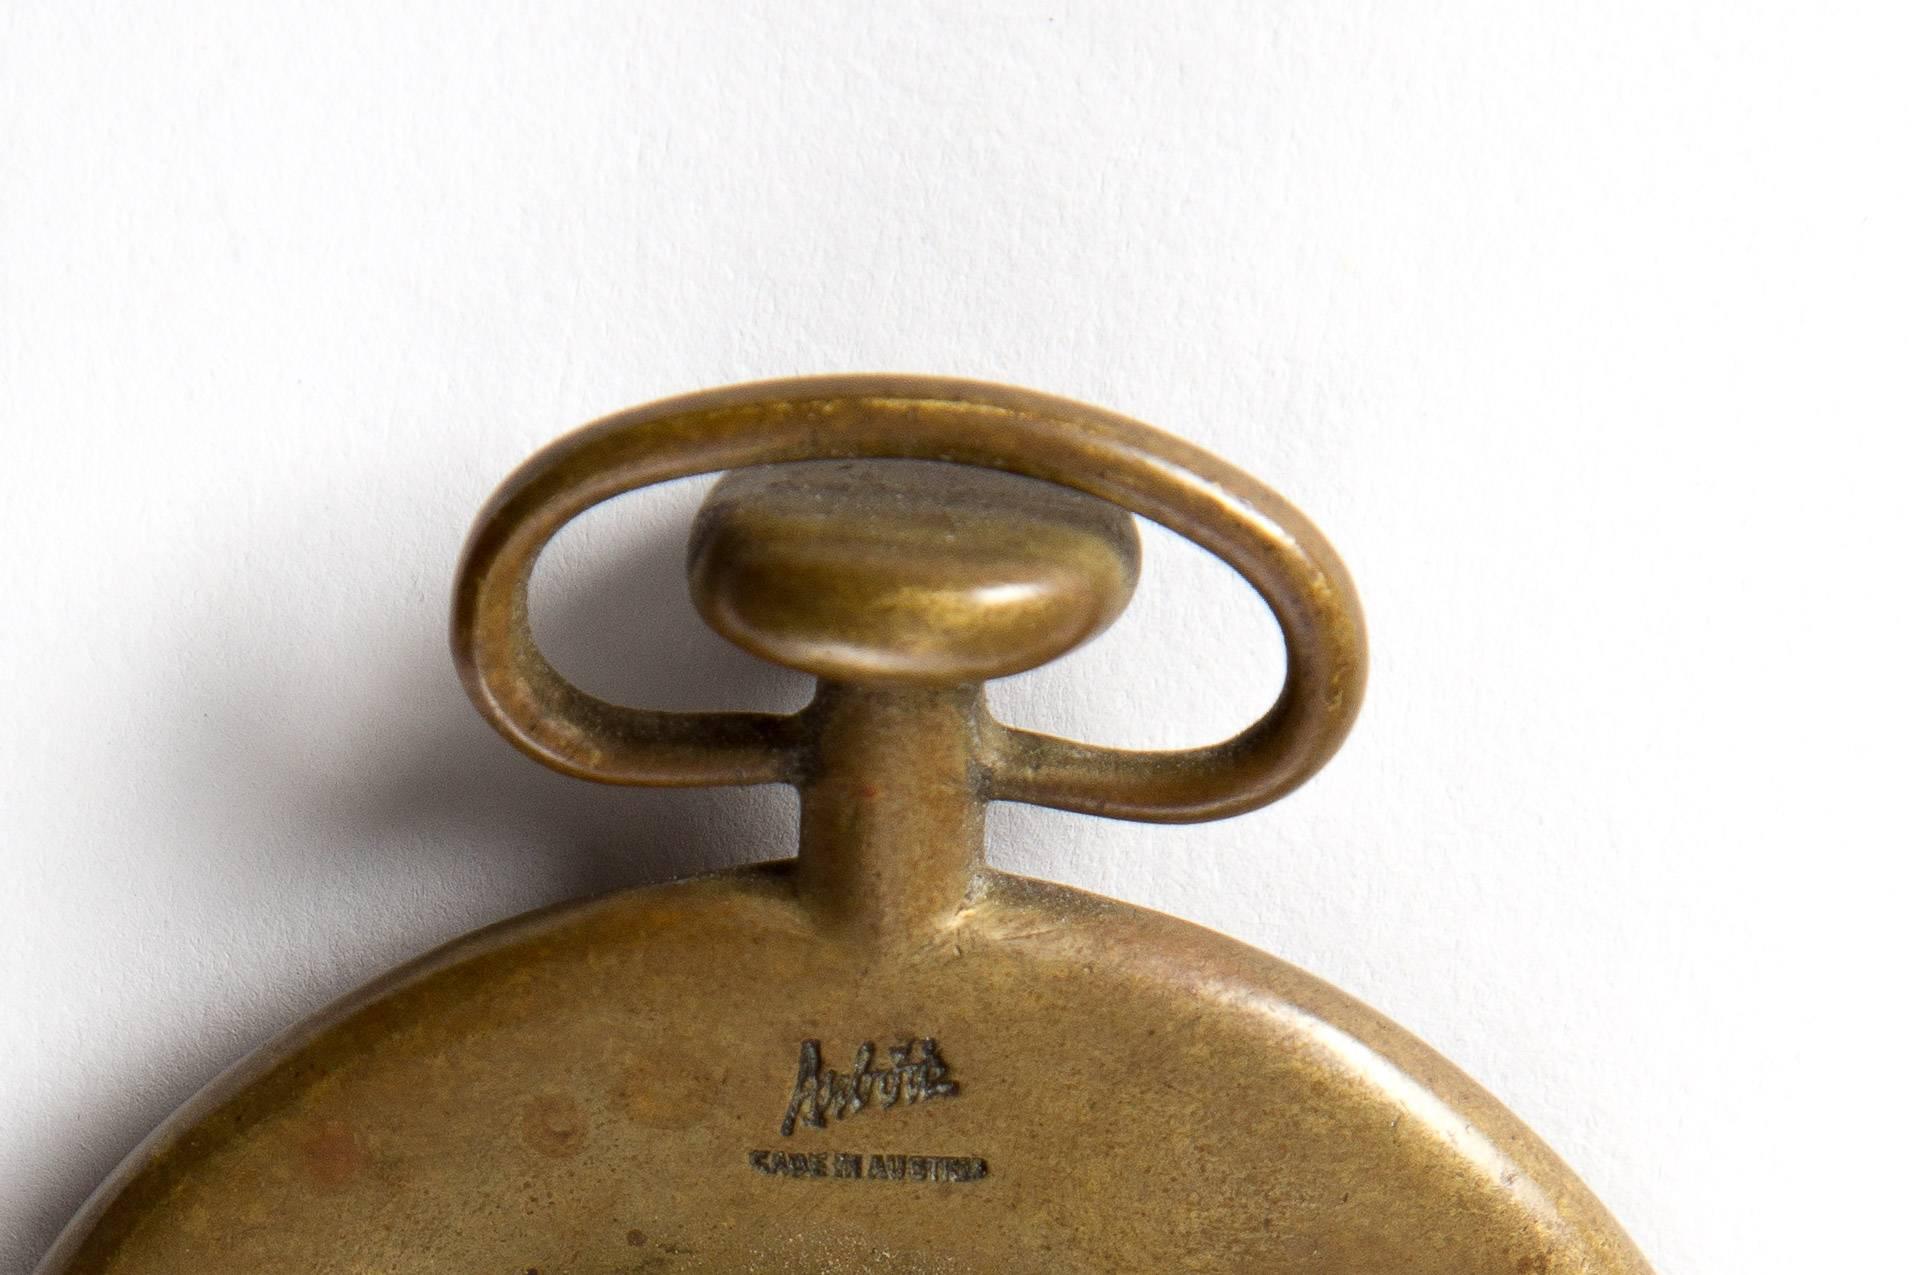 Carl Auböck. Brass opener as a pocket watch. Market on the back. Heavy piece. Can also be used as a paperweight.